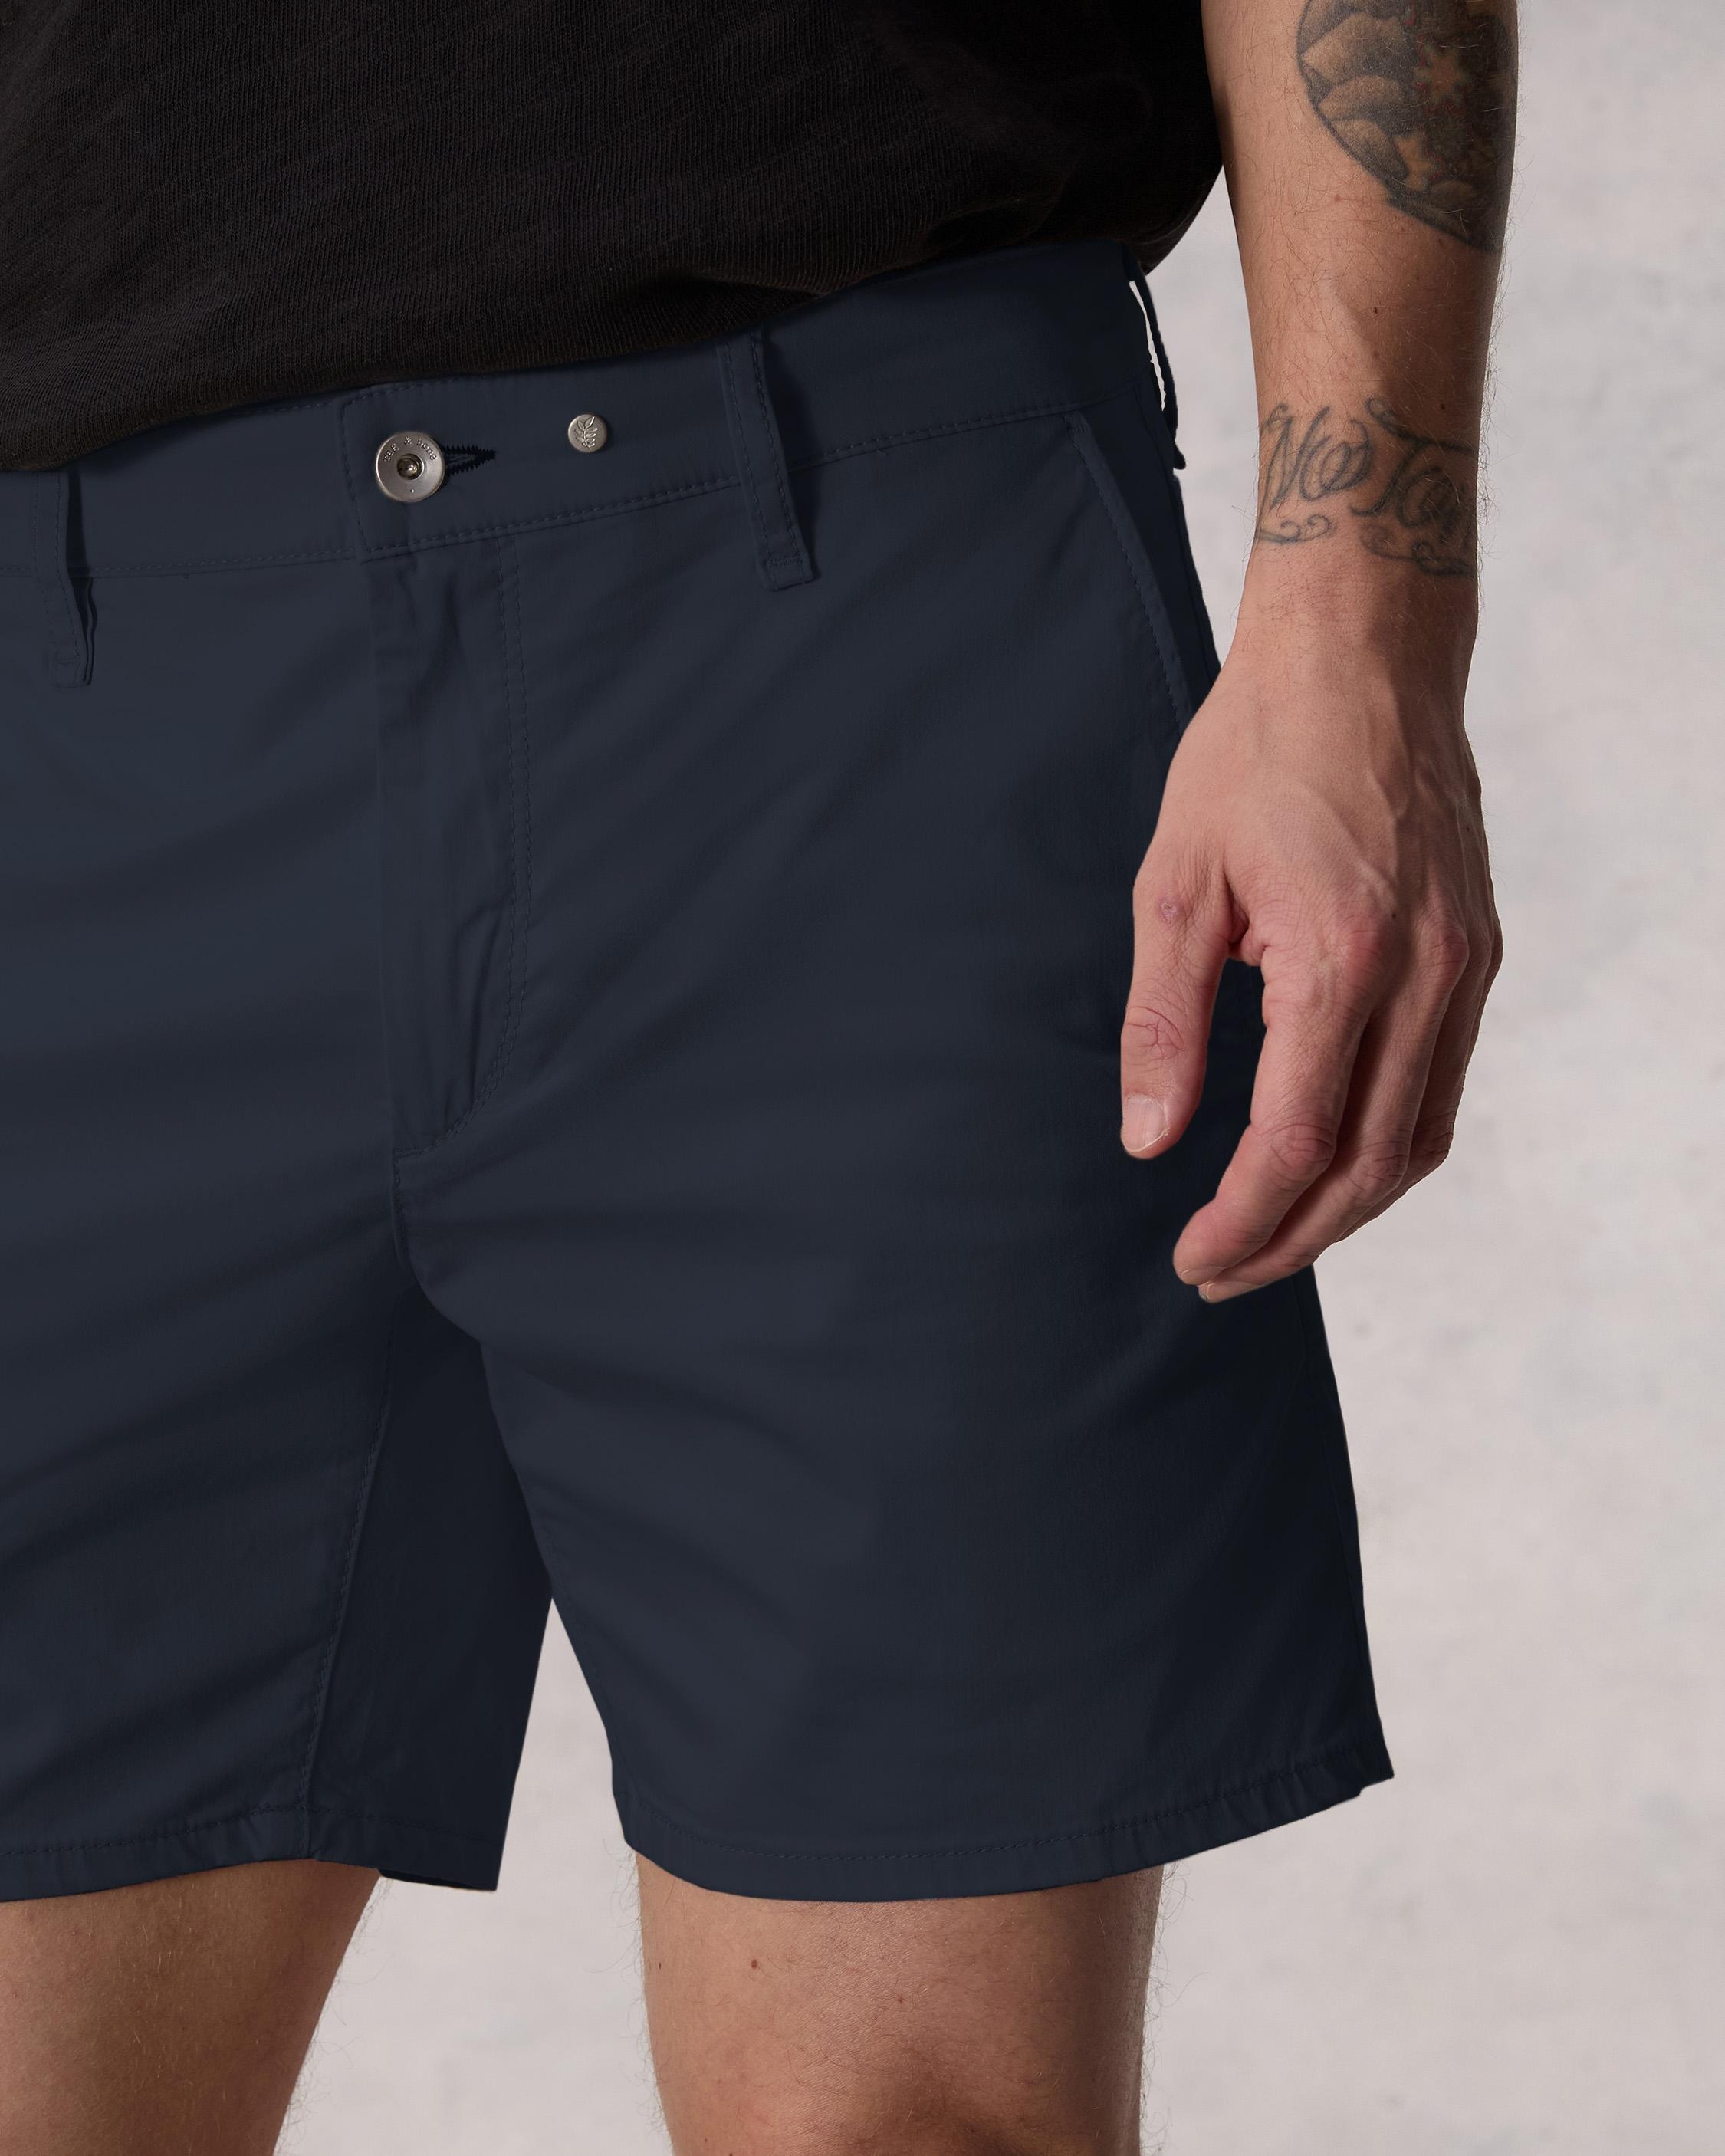 Standard Cotton Chino Short
Classic Fit - 6